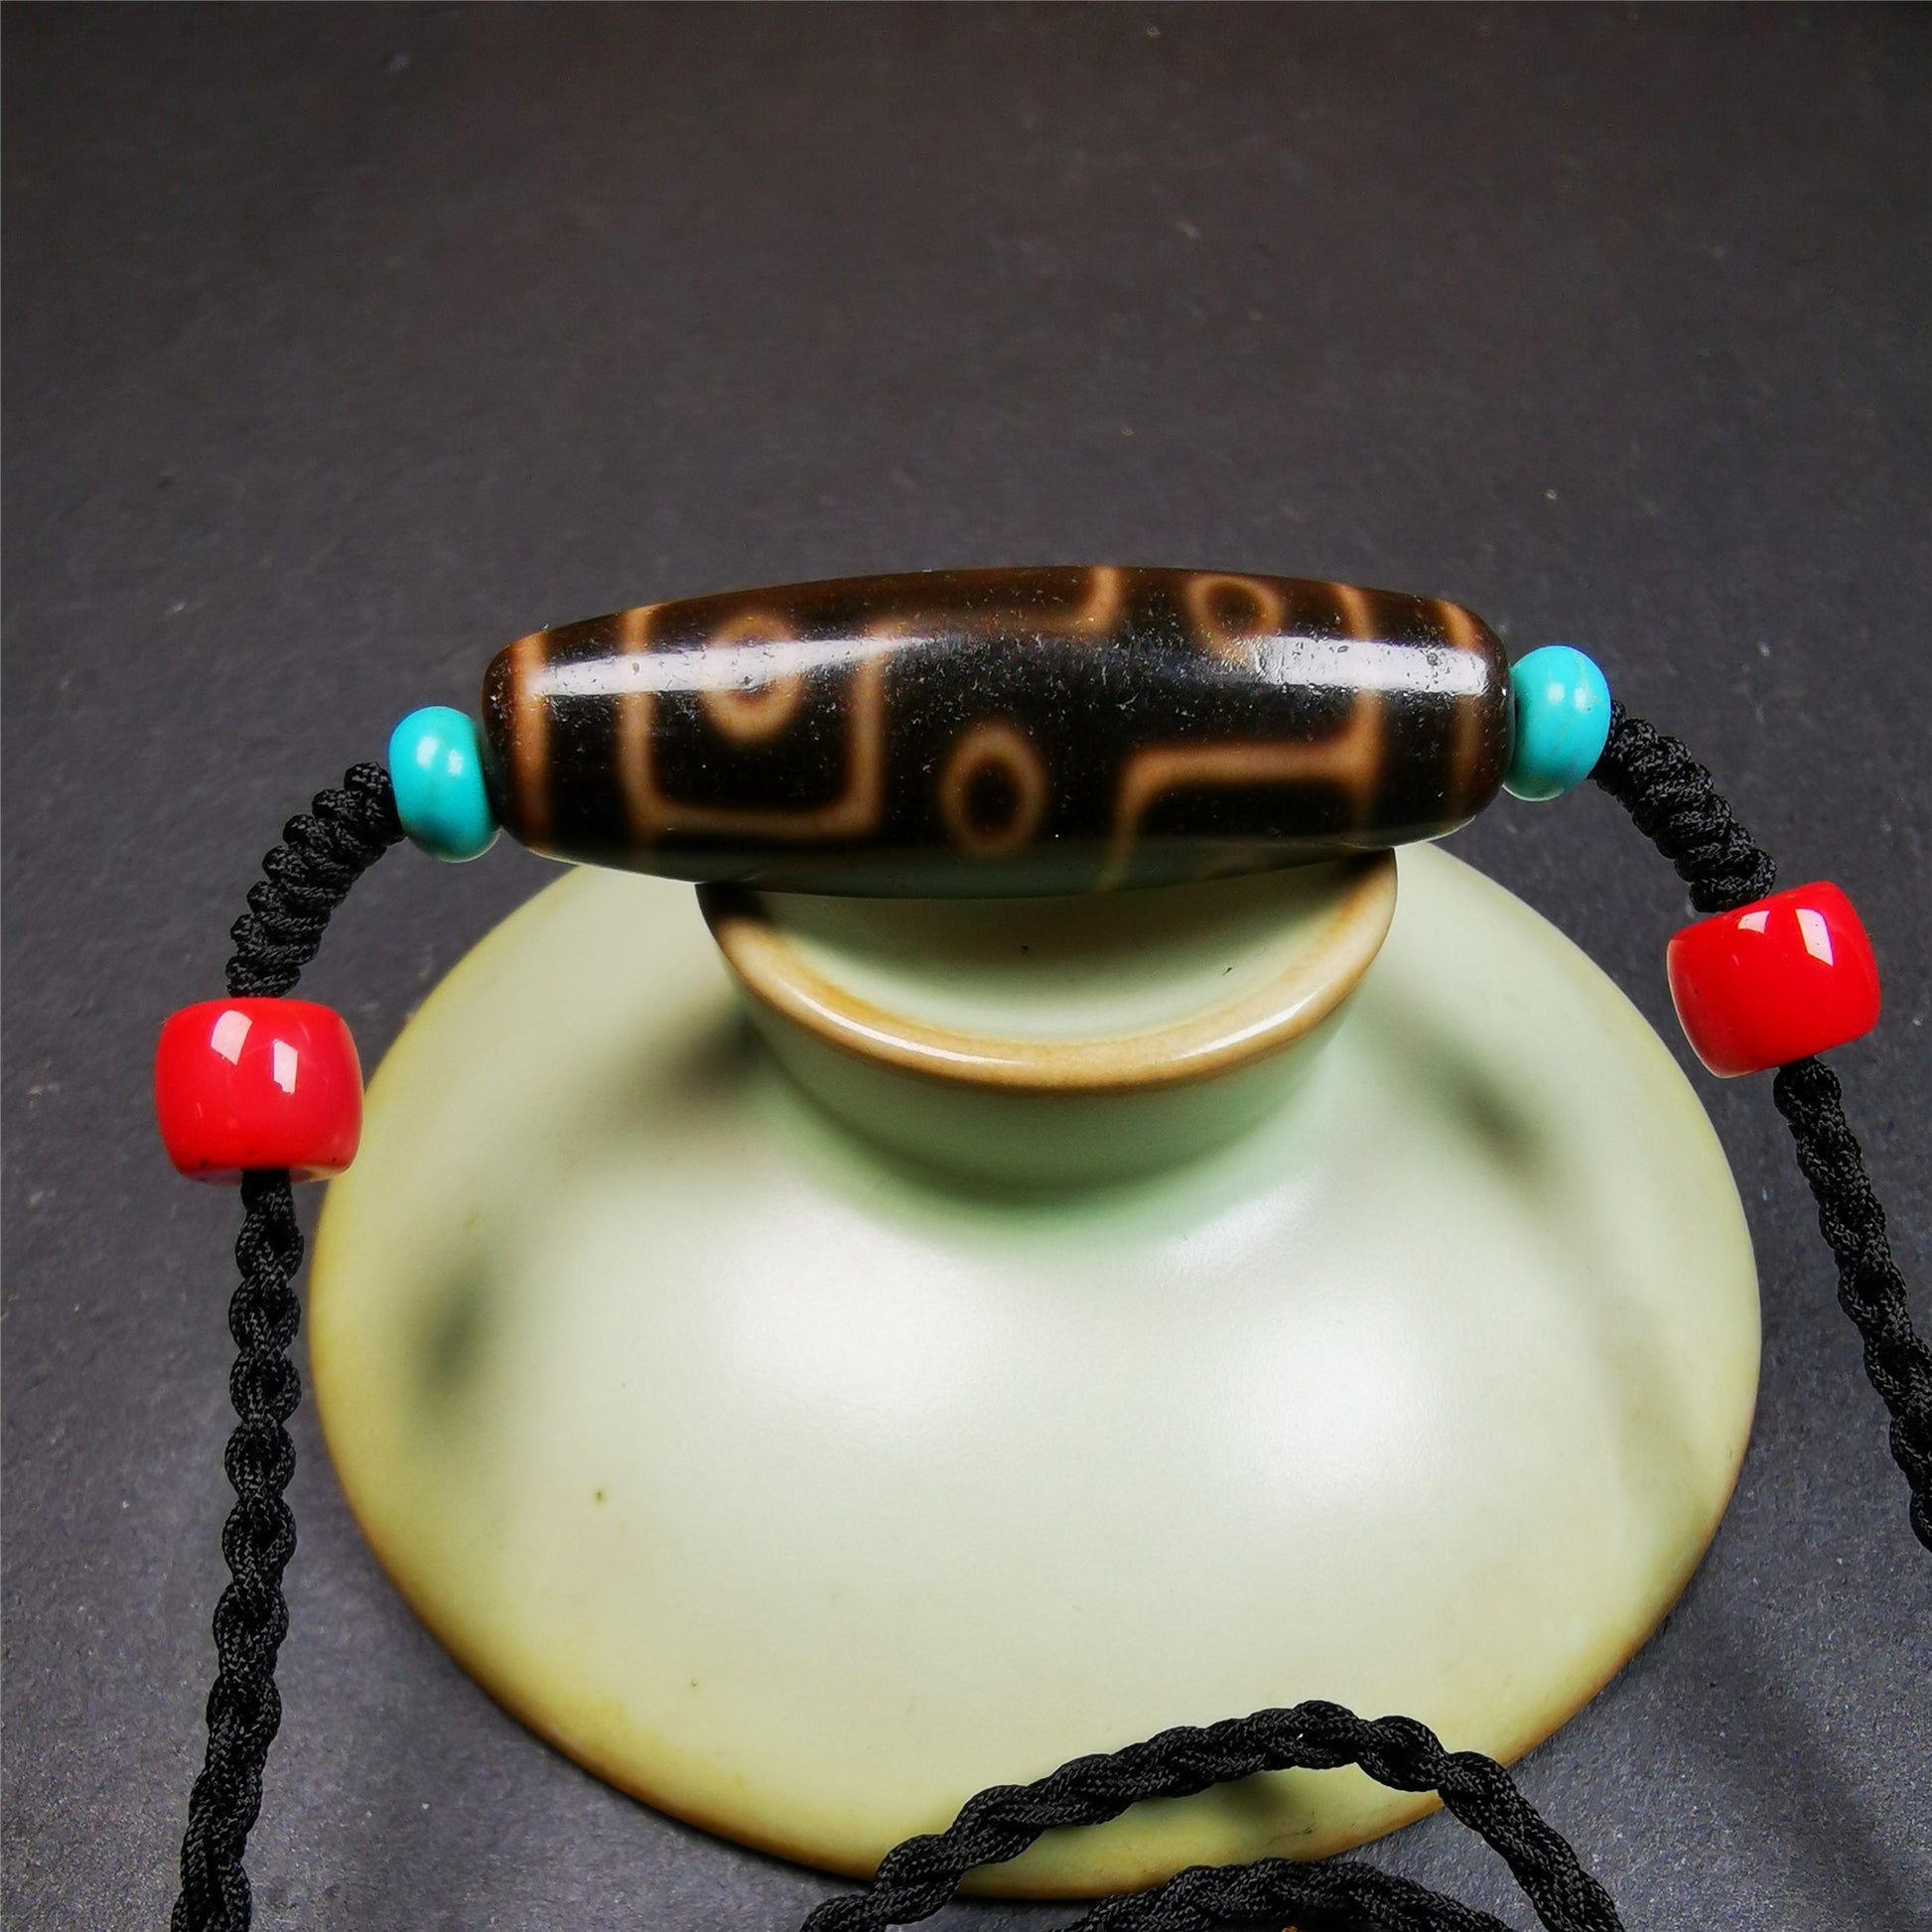 This 9 eyes dzi bead was collected from gerze Tibet,about 50 years old. The necklace was hand-woven by Tibetans from Baiyu County, the main bead is a brown color 9 eyes dzi, paired with 2 turquoise beads and 2 red agate beads.